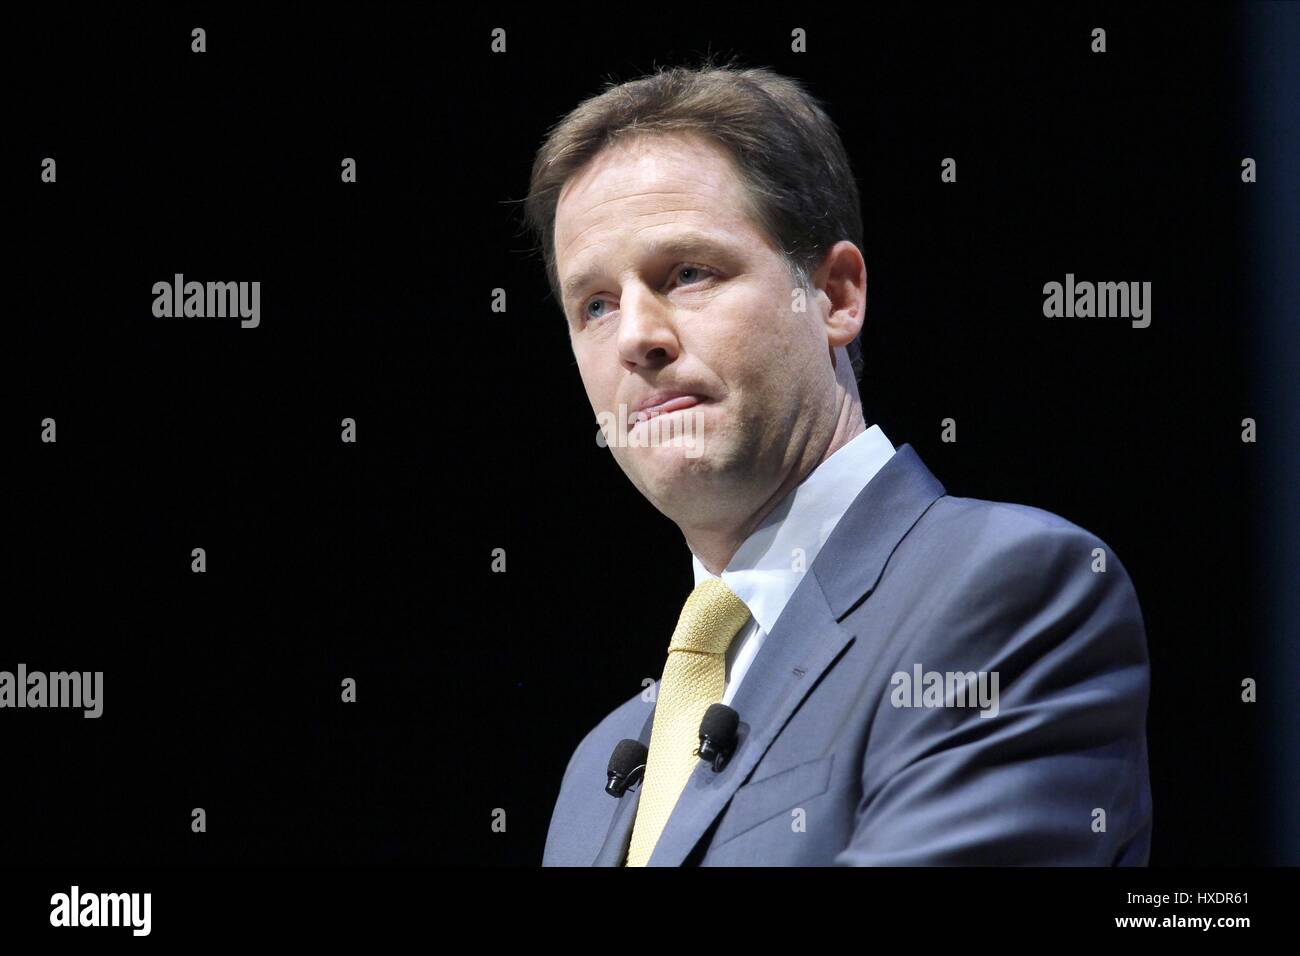 NICK CLEGG MP LIBERAL DEMOCRAT LEADER 20 September 2010 THE AAC LIVERPOOL ENGLAND Stock Photo